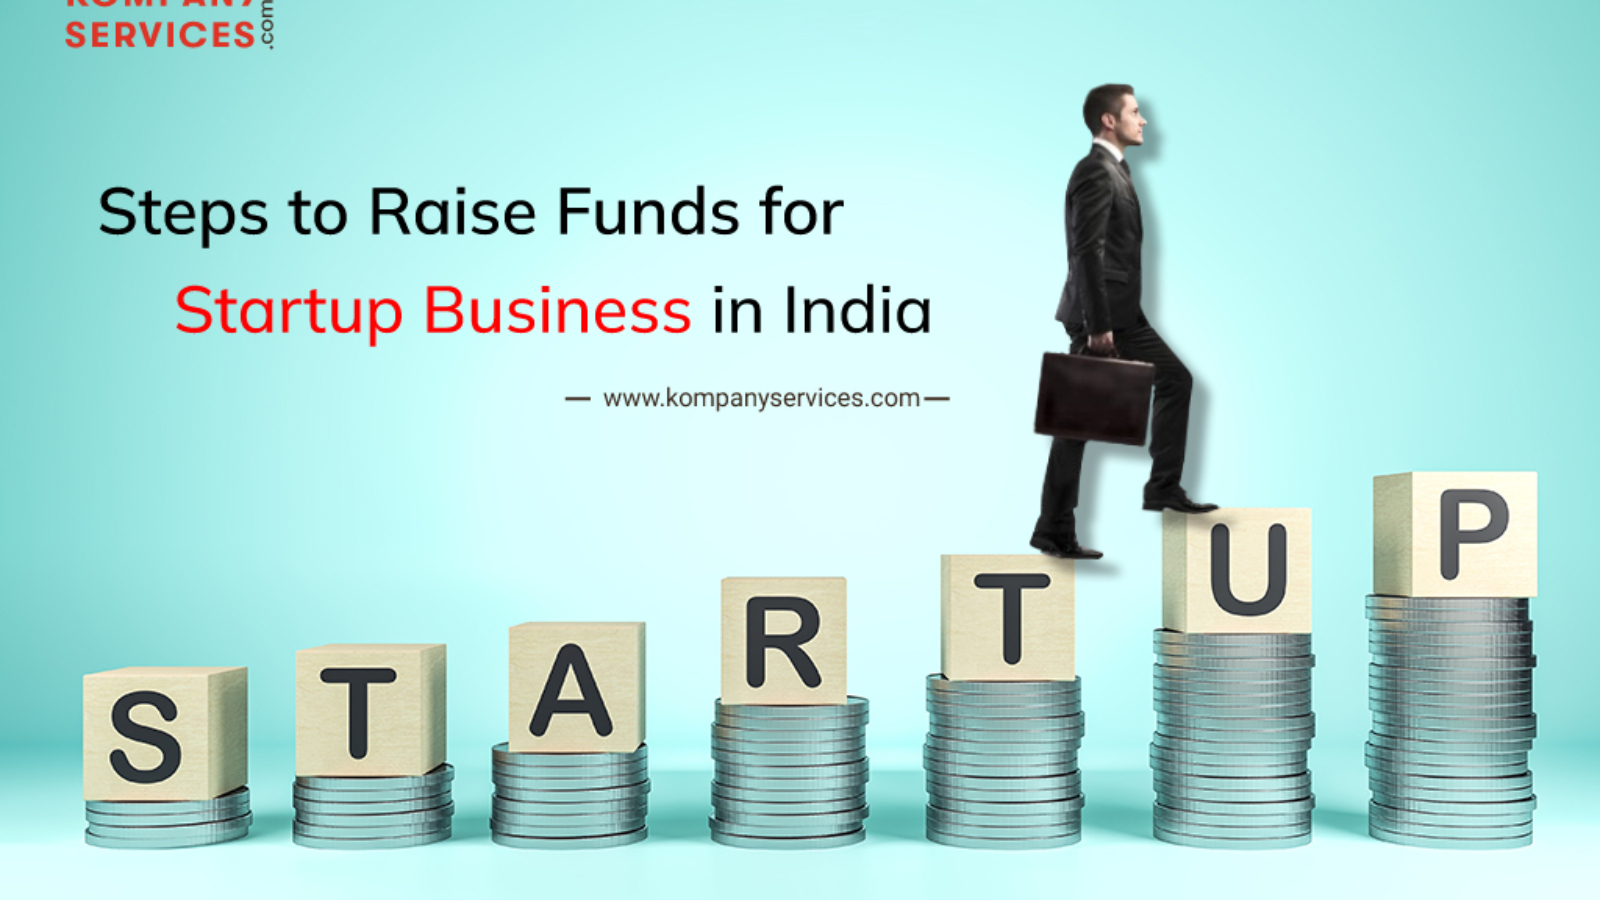 Steps to Raise Funds for Startup Business in India